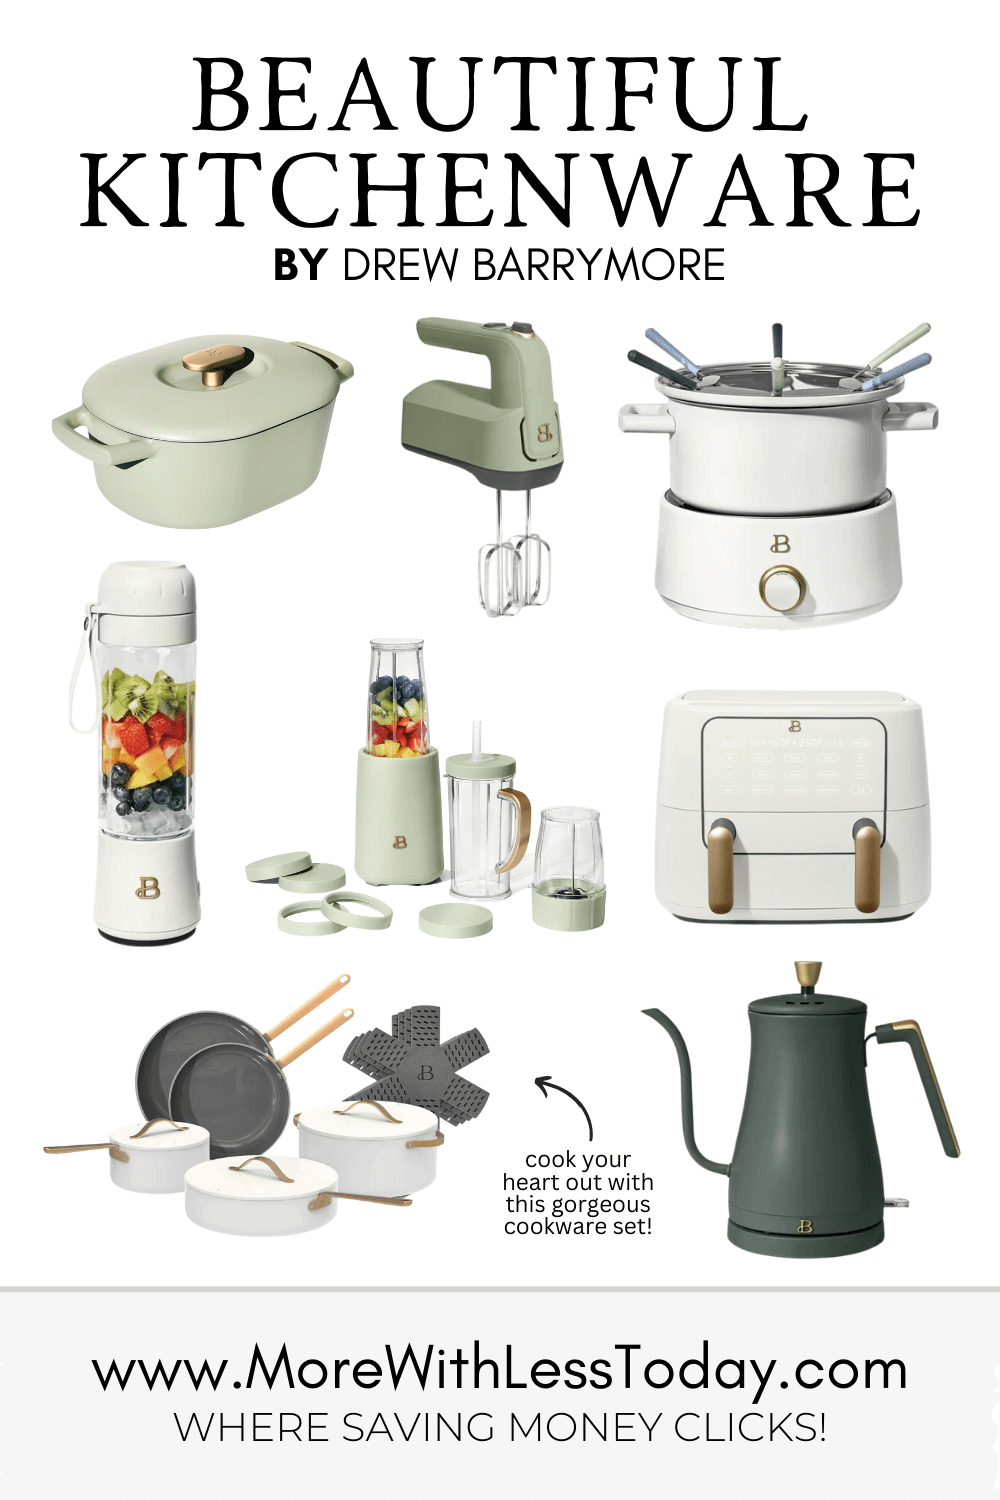 New items from Beautiful Kitchenware by Drew Barrymore - PIN